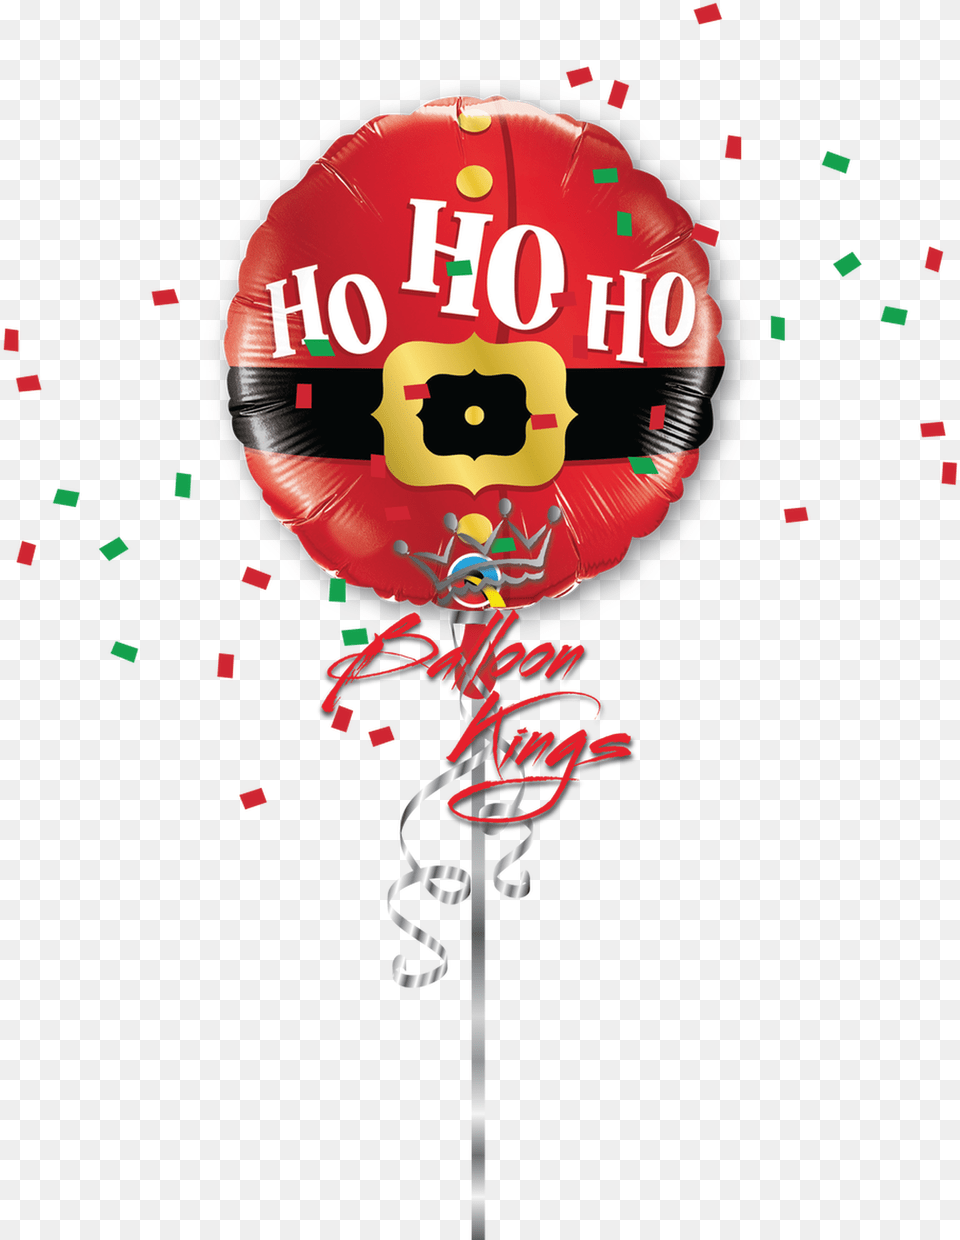 Ho Ho Ho Baby Boy Banners, Balloon, Food, Sweets, Candy Free Png Download